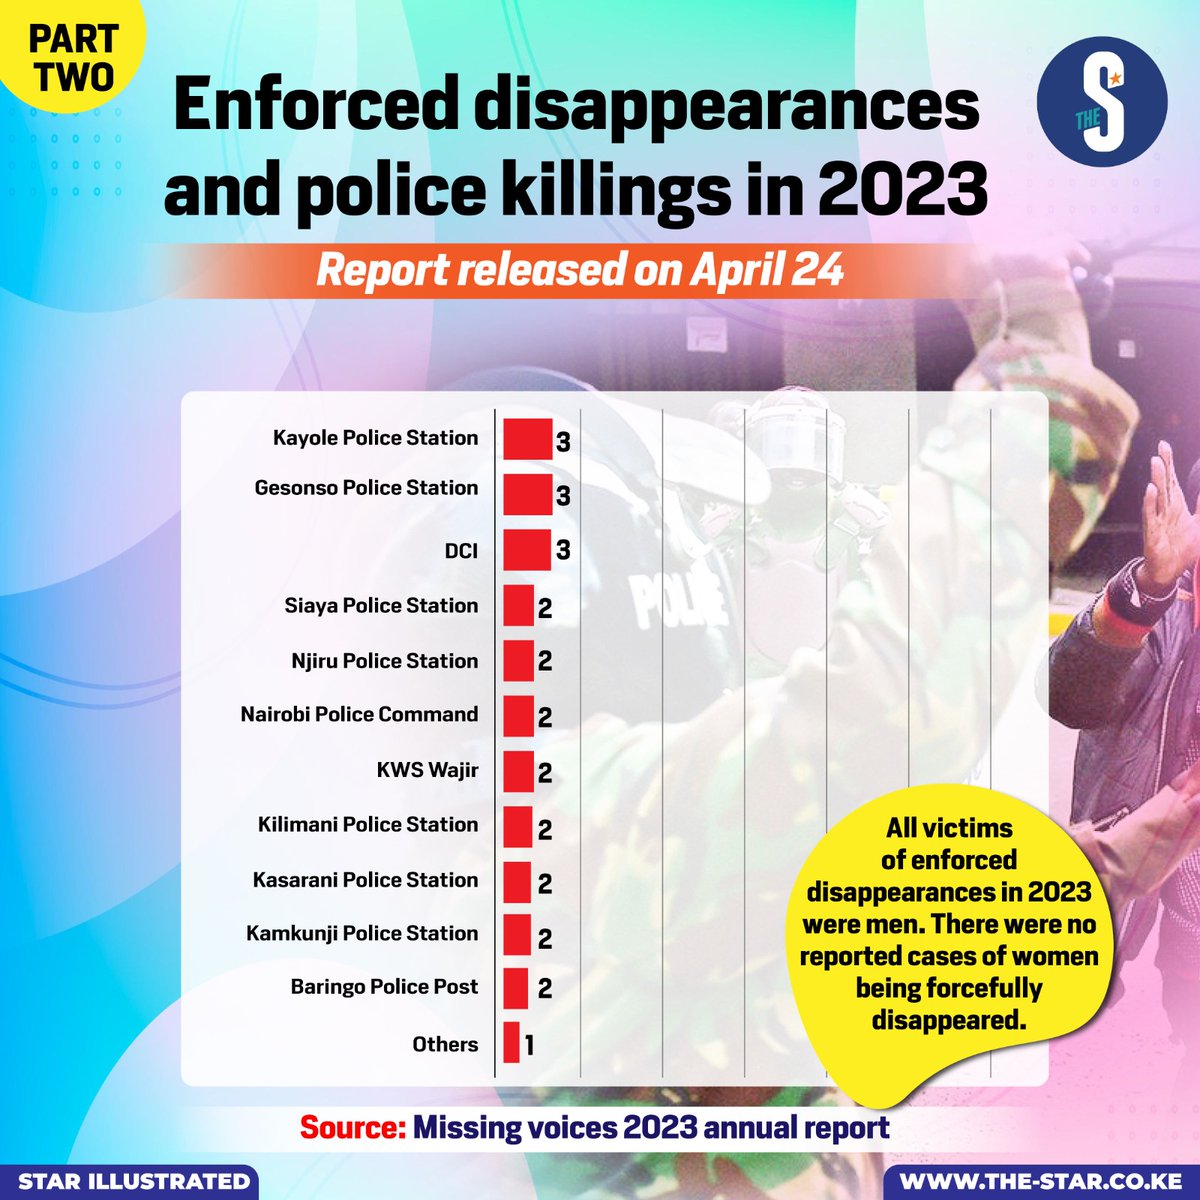 Enforced disappearances and police killings in 2023
#starinfographics